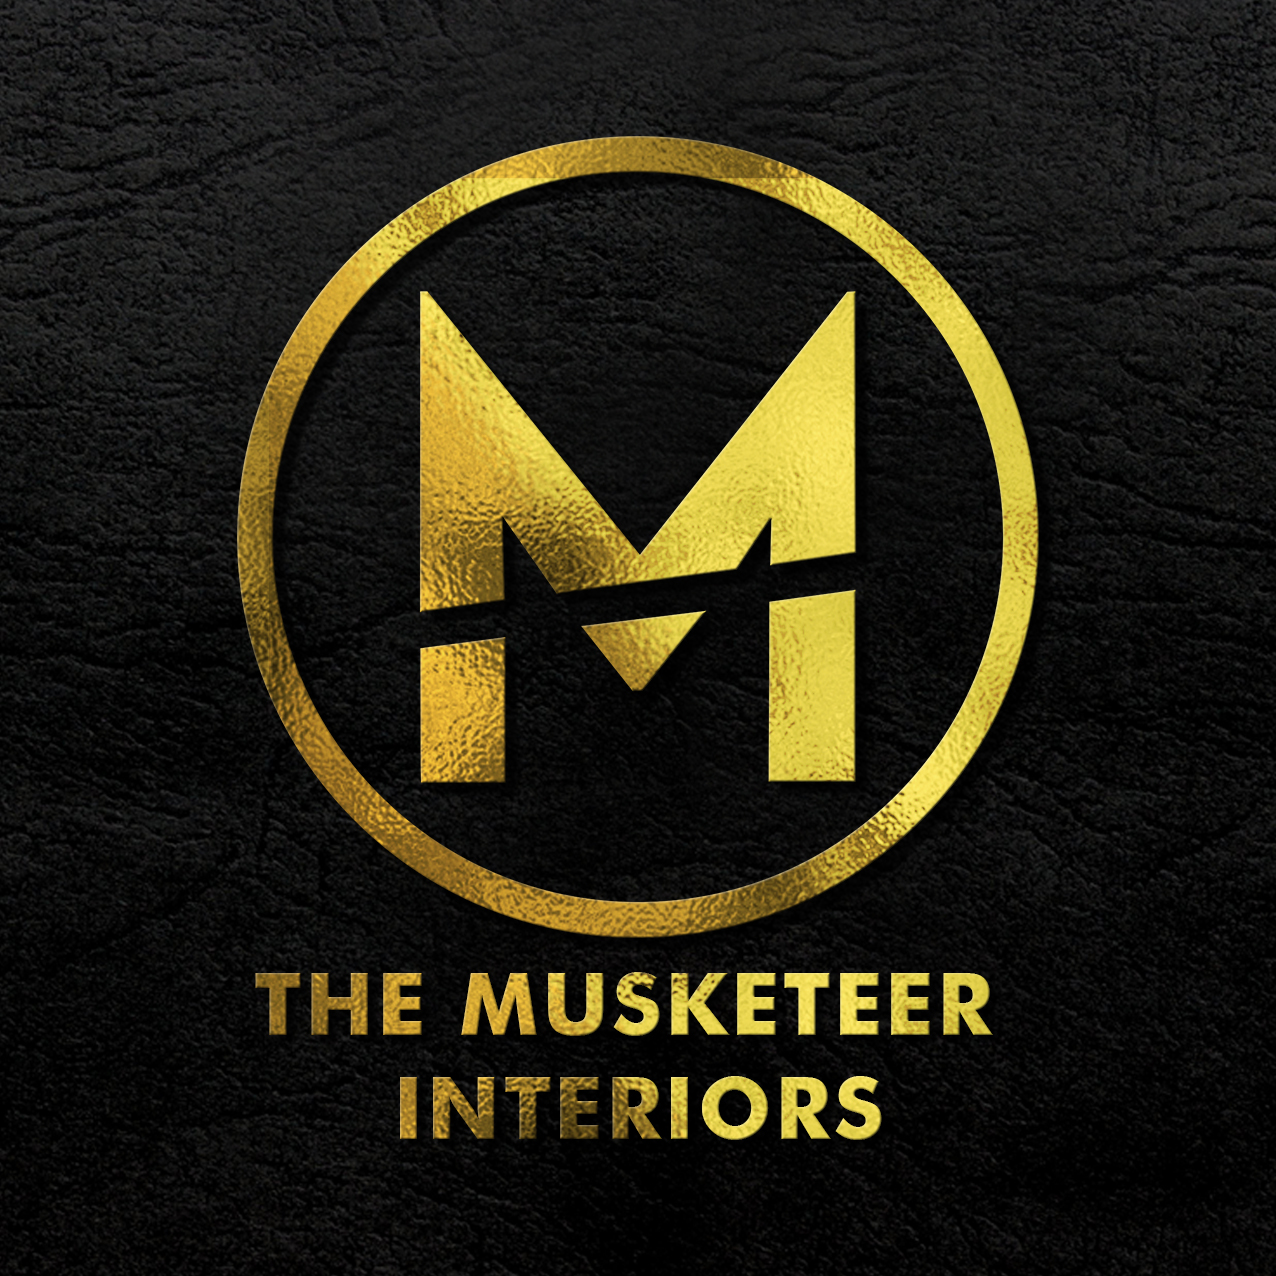 The Musketeer Interiors